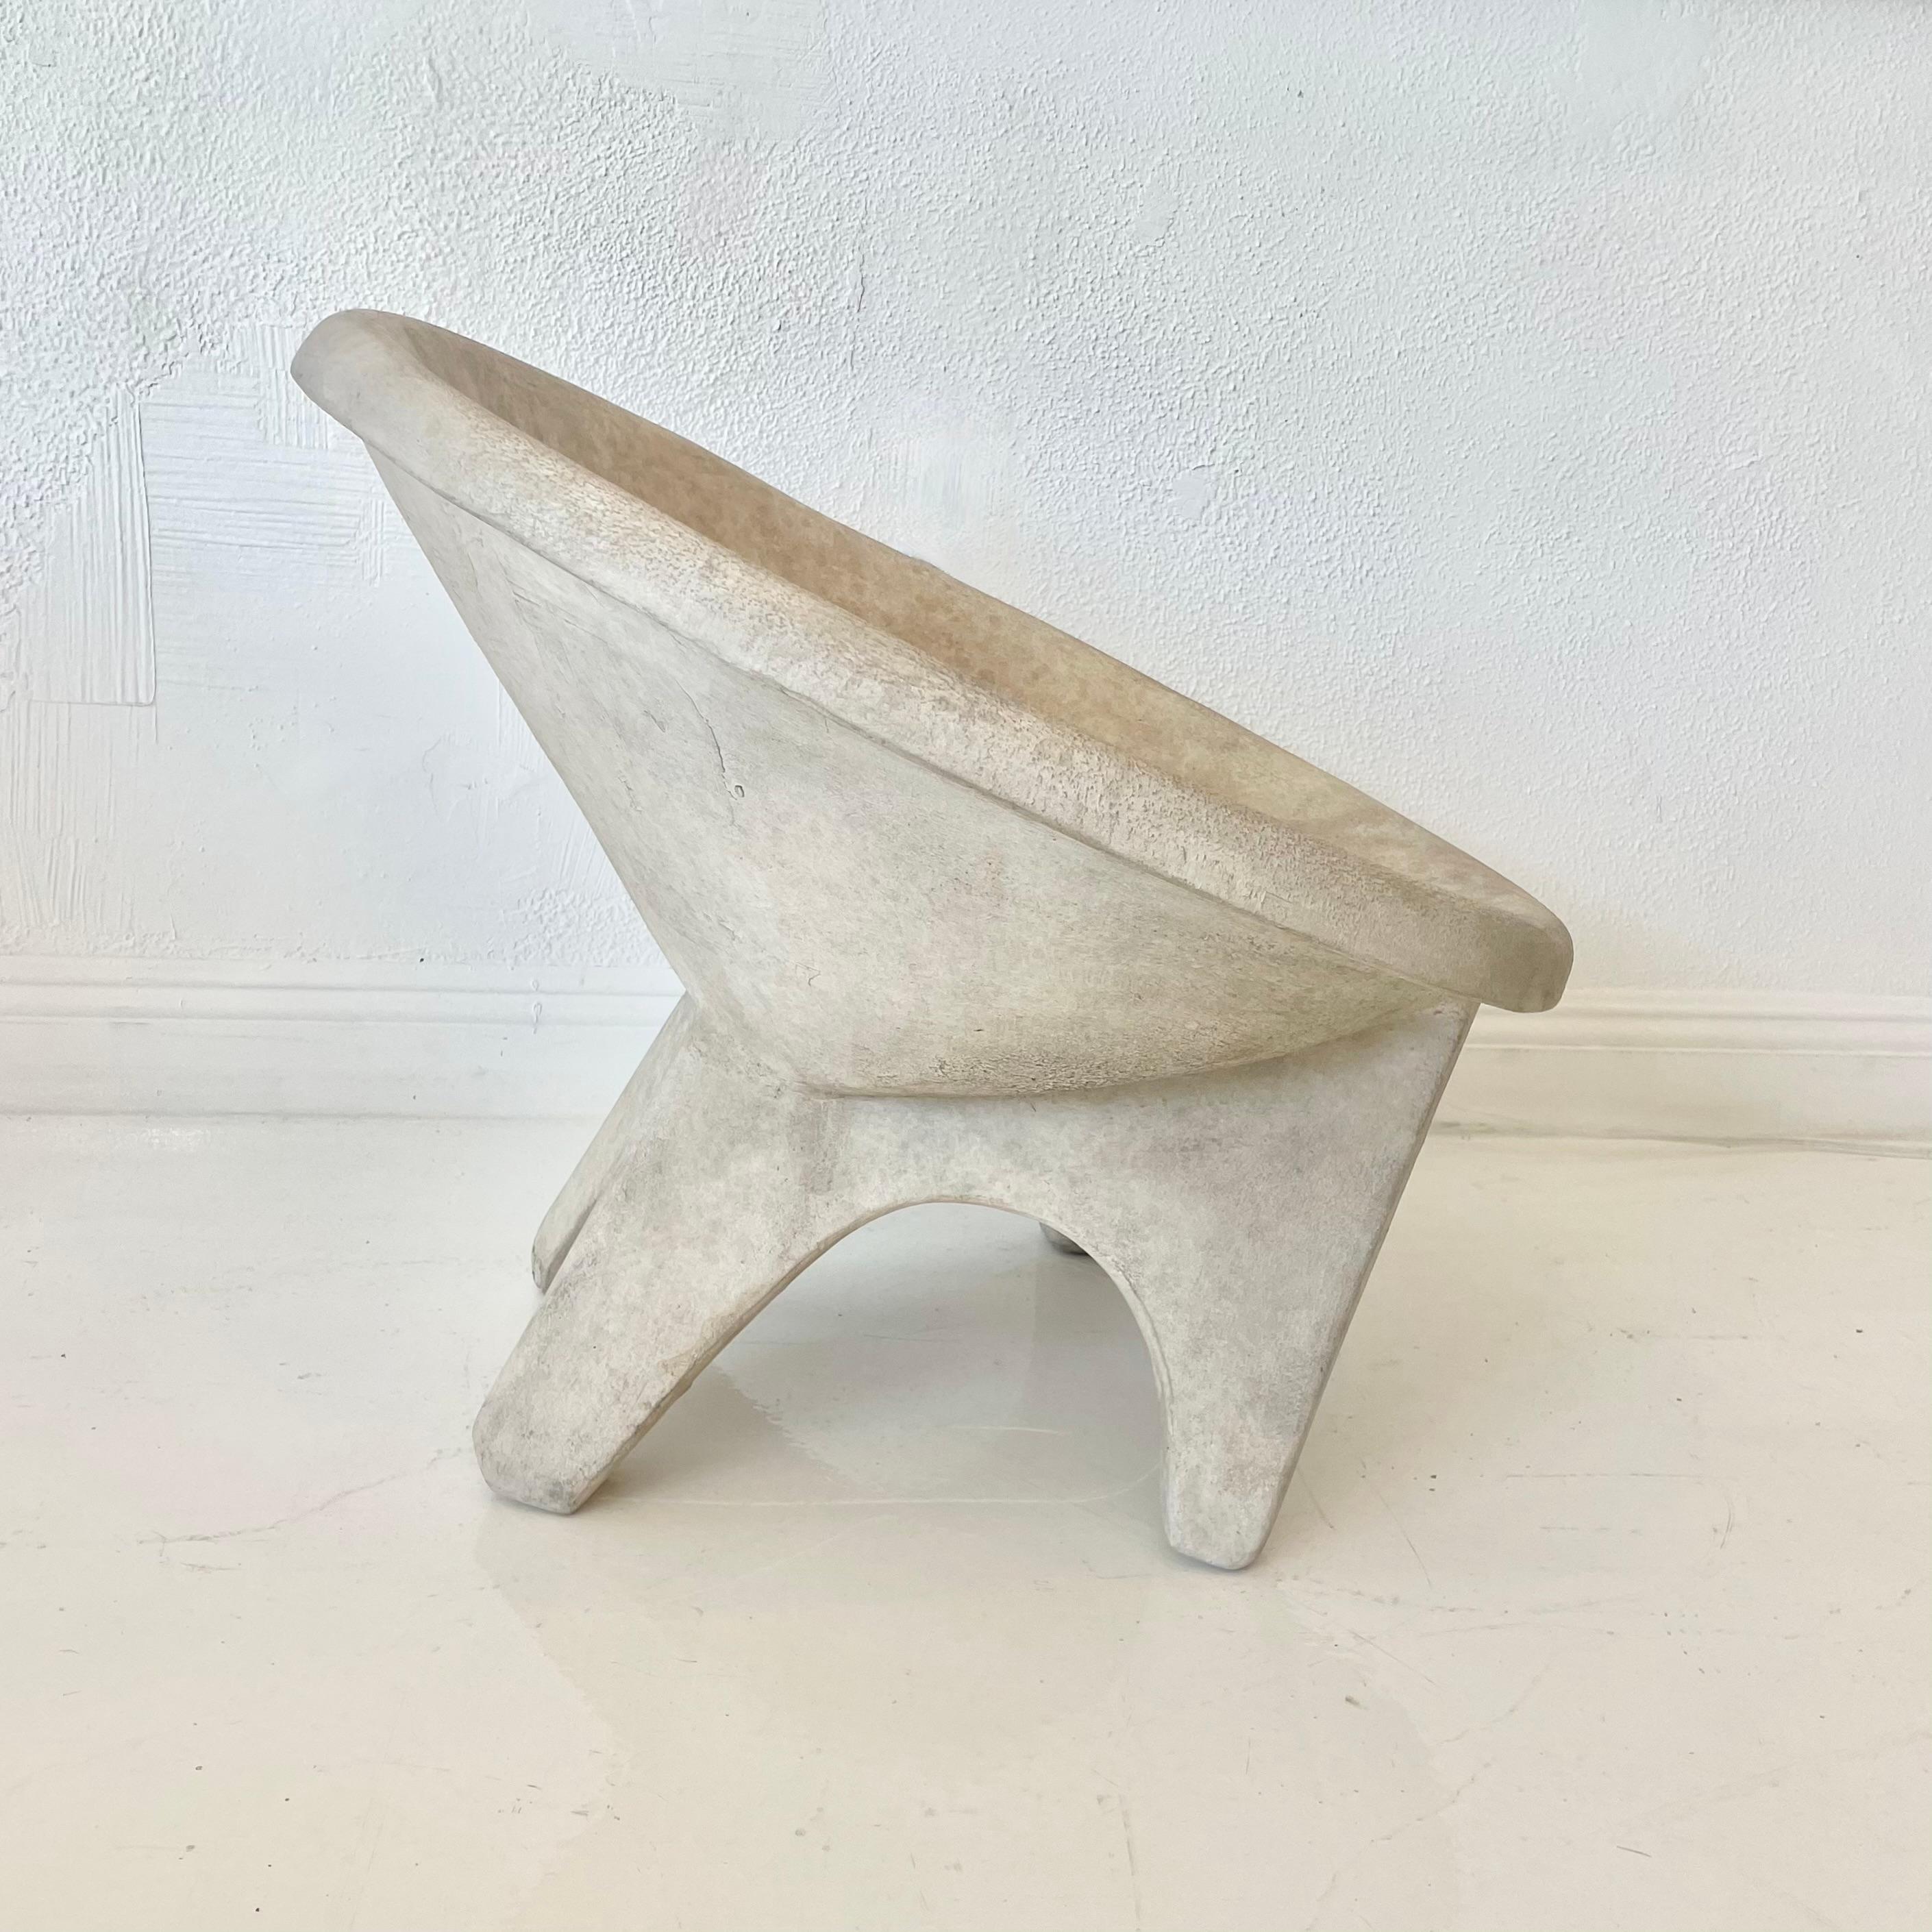 American Sculptural Concrete Chair by Merit, Los Angeles For Sale